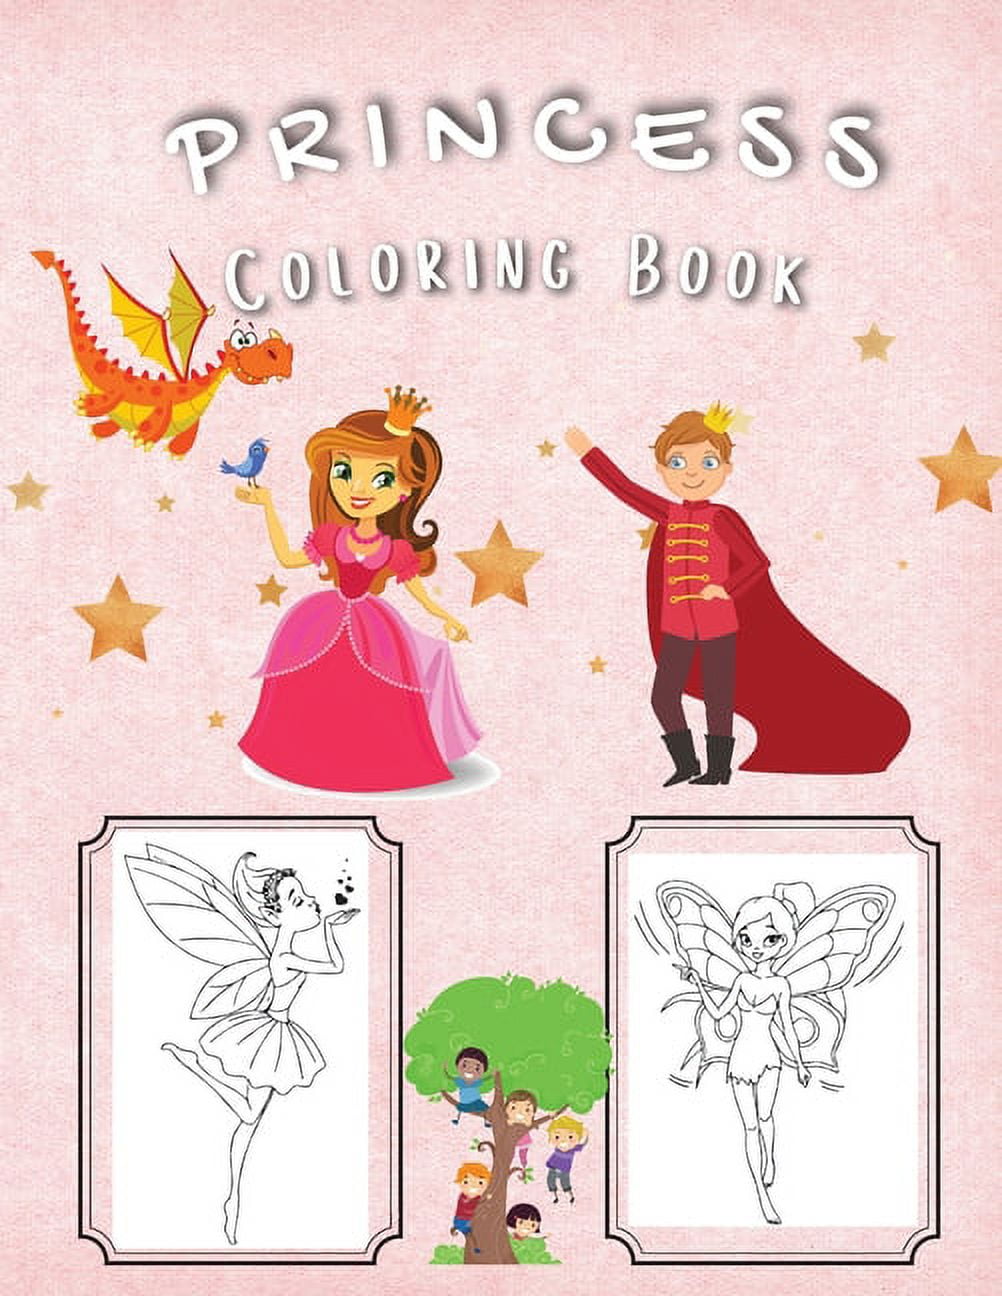 Princess Coloring Book: Coloring Pages of Princess for Girls | Coloring Book with Easy, Fun and Relaxing Images for Toddlers | Beautiful Coloring Pages with Princesses [Book]